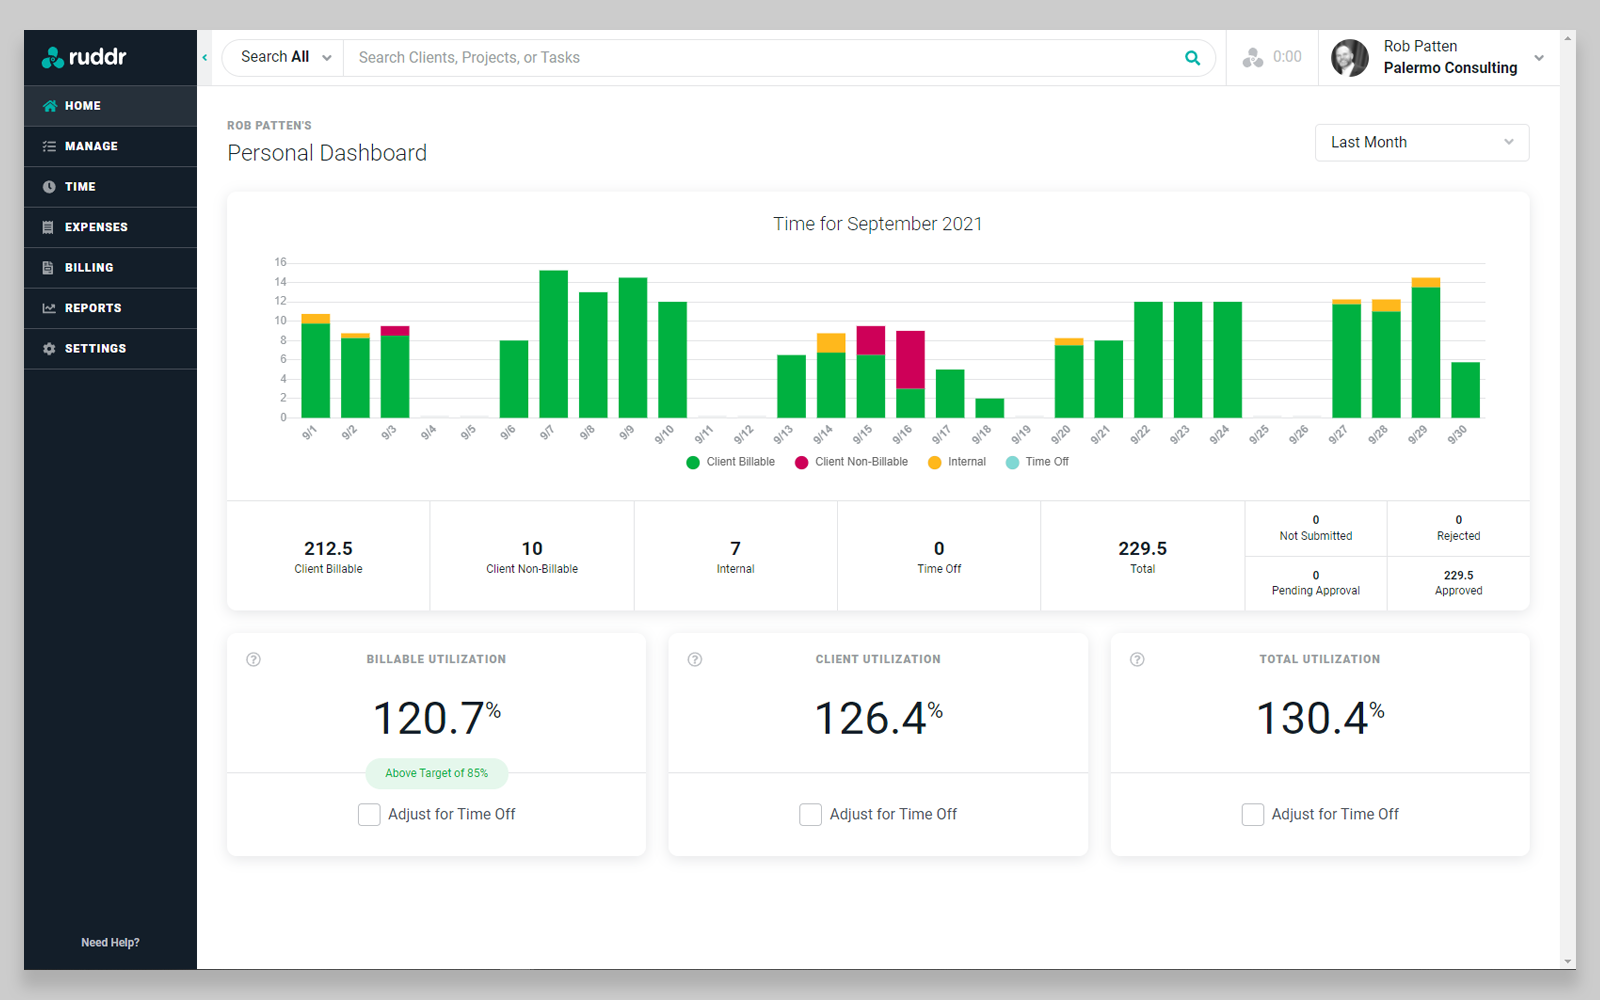 The Personal Dashboard helps team members keep track of their time and utilization.